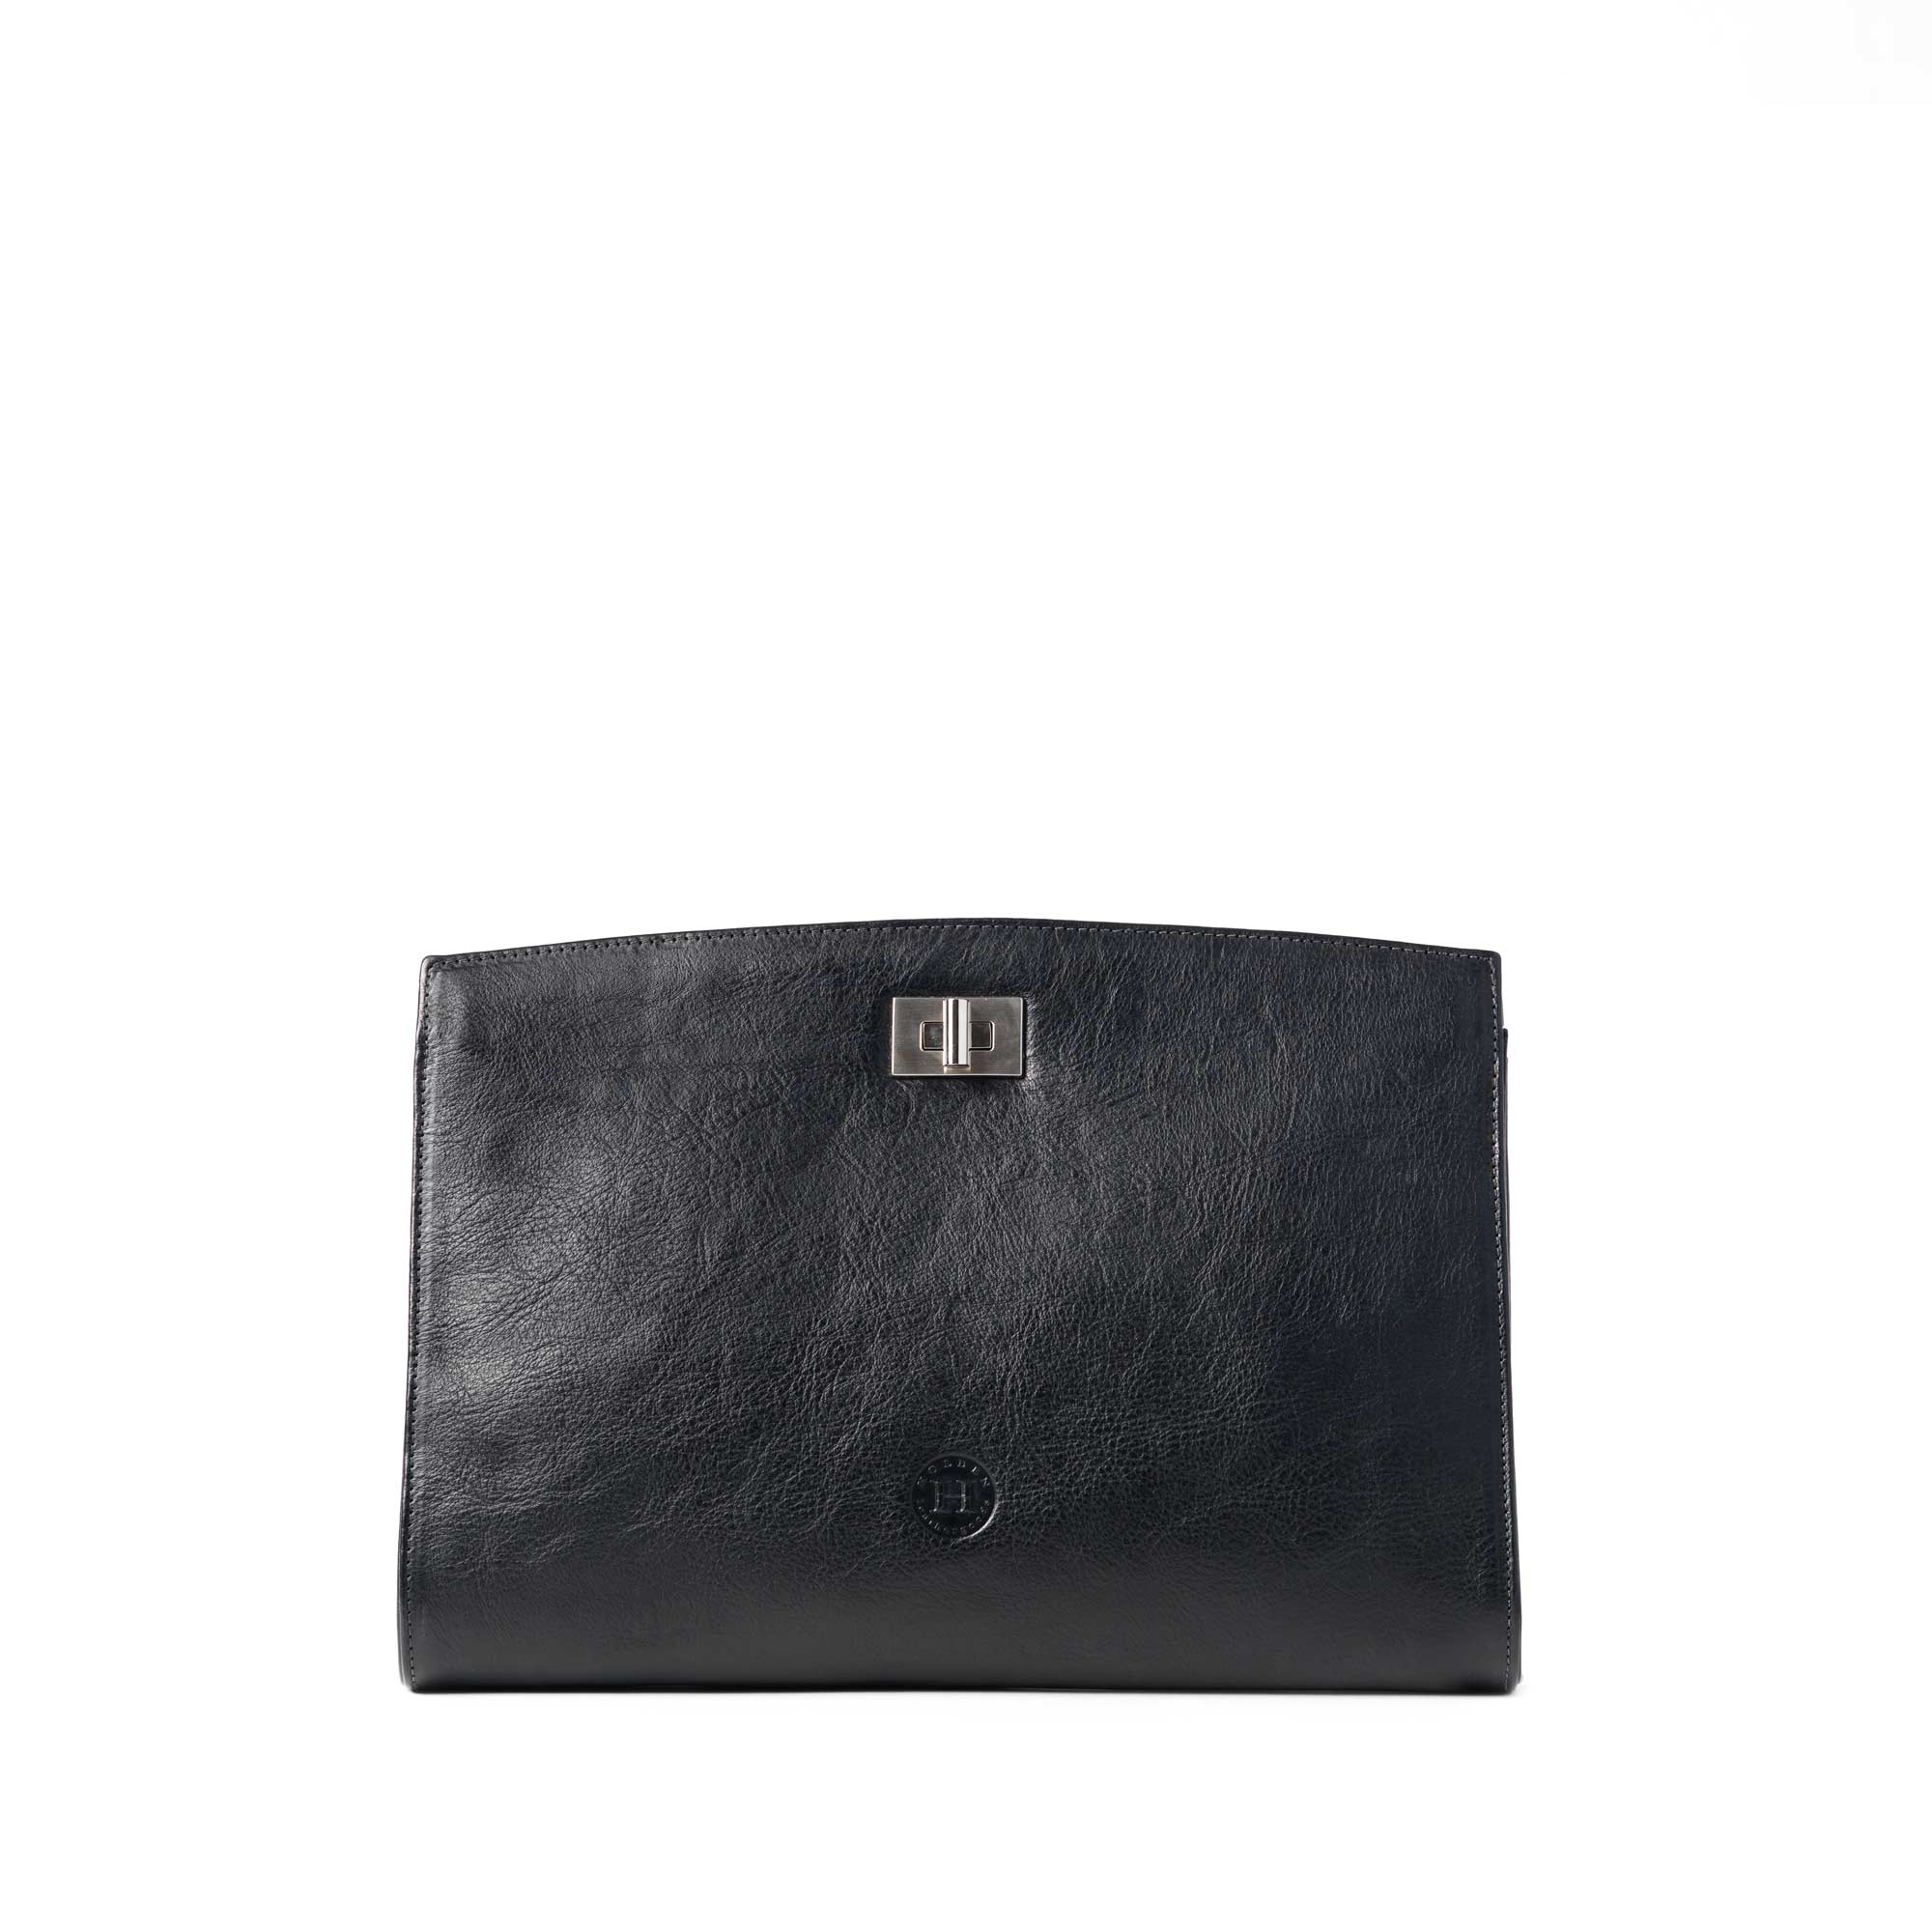 Our Emer Black leather clutch bag